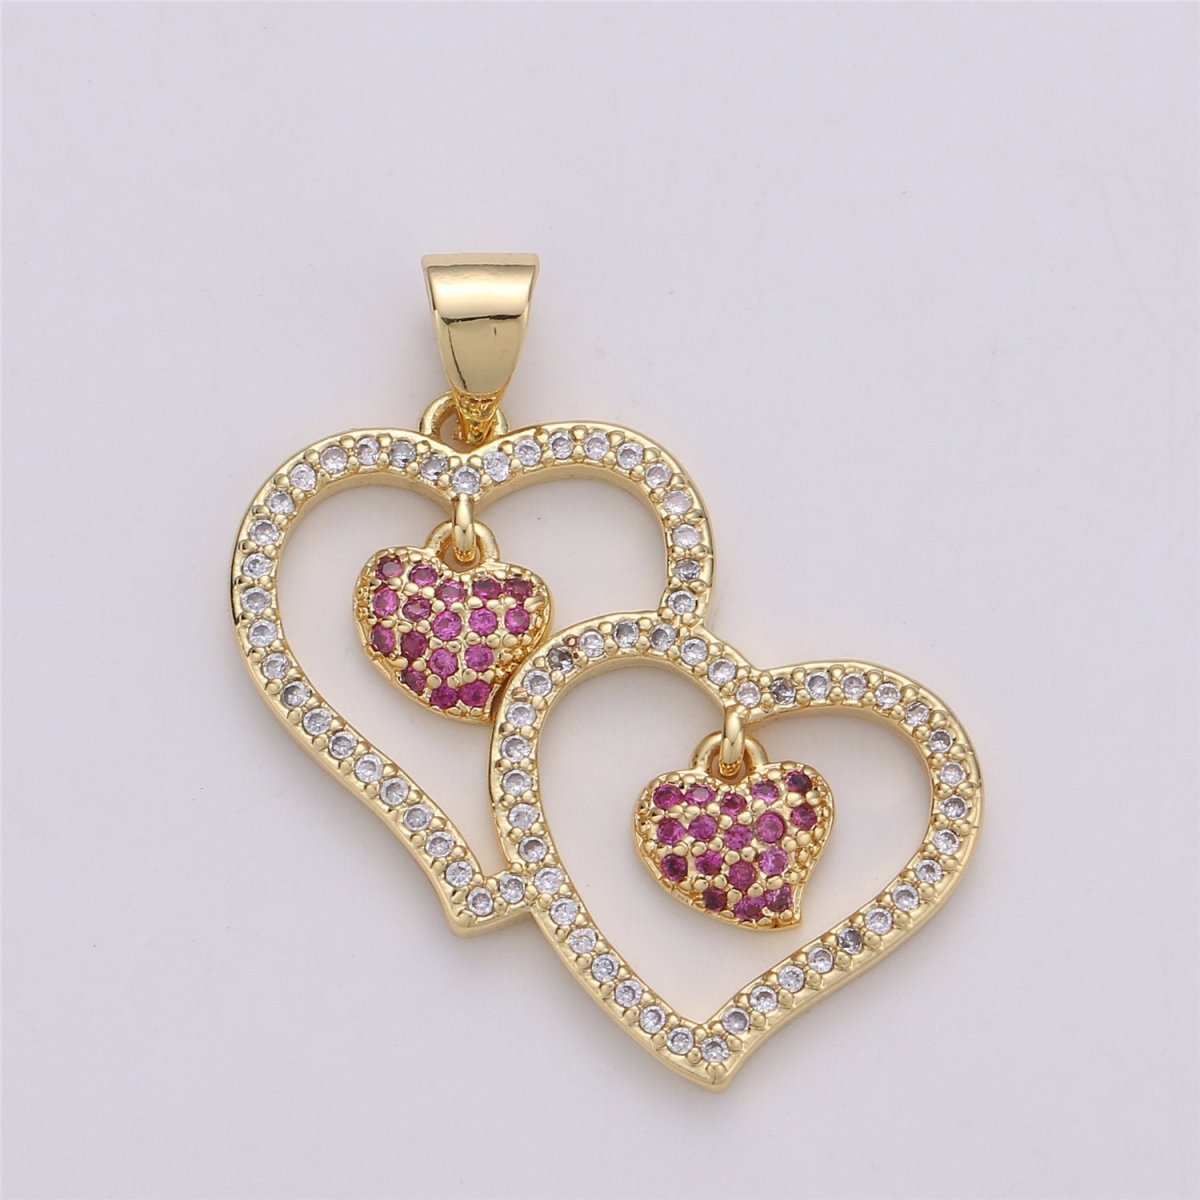 Micro Pave Double Heart Pendant Cubic Twin Heart Charm 14k Gold Filled linked Heart Charm Earrings Necklace Component I-588 - DLUXCA